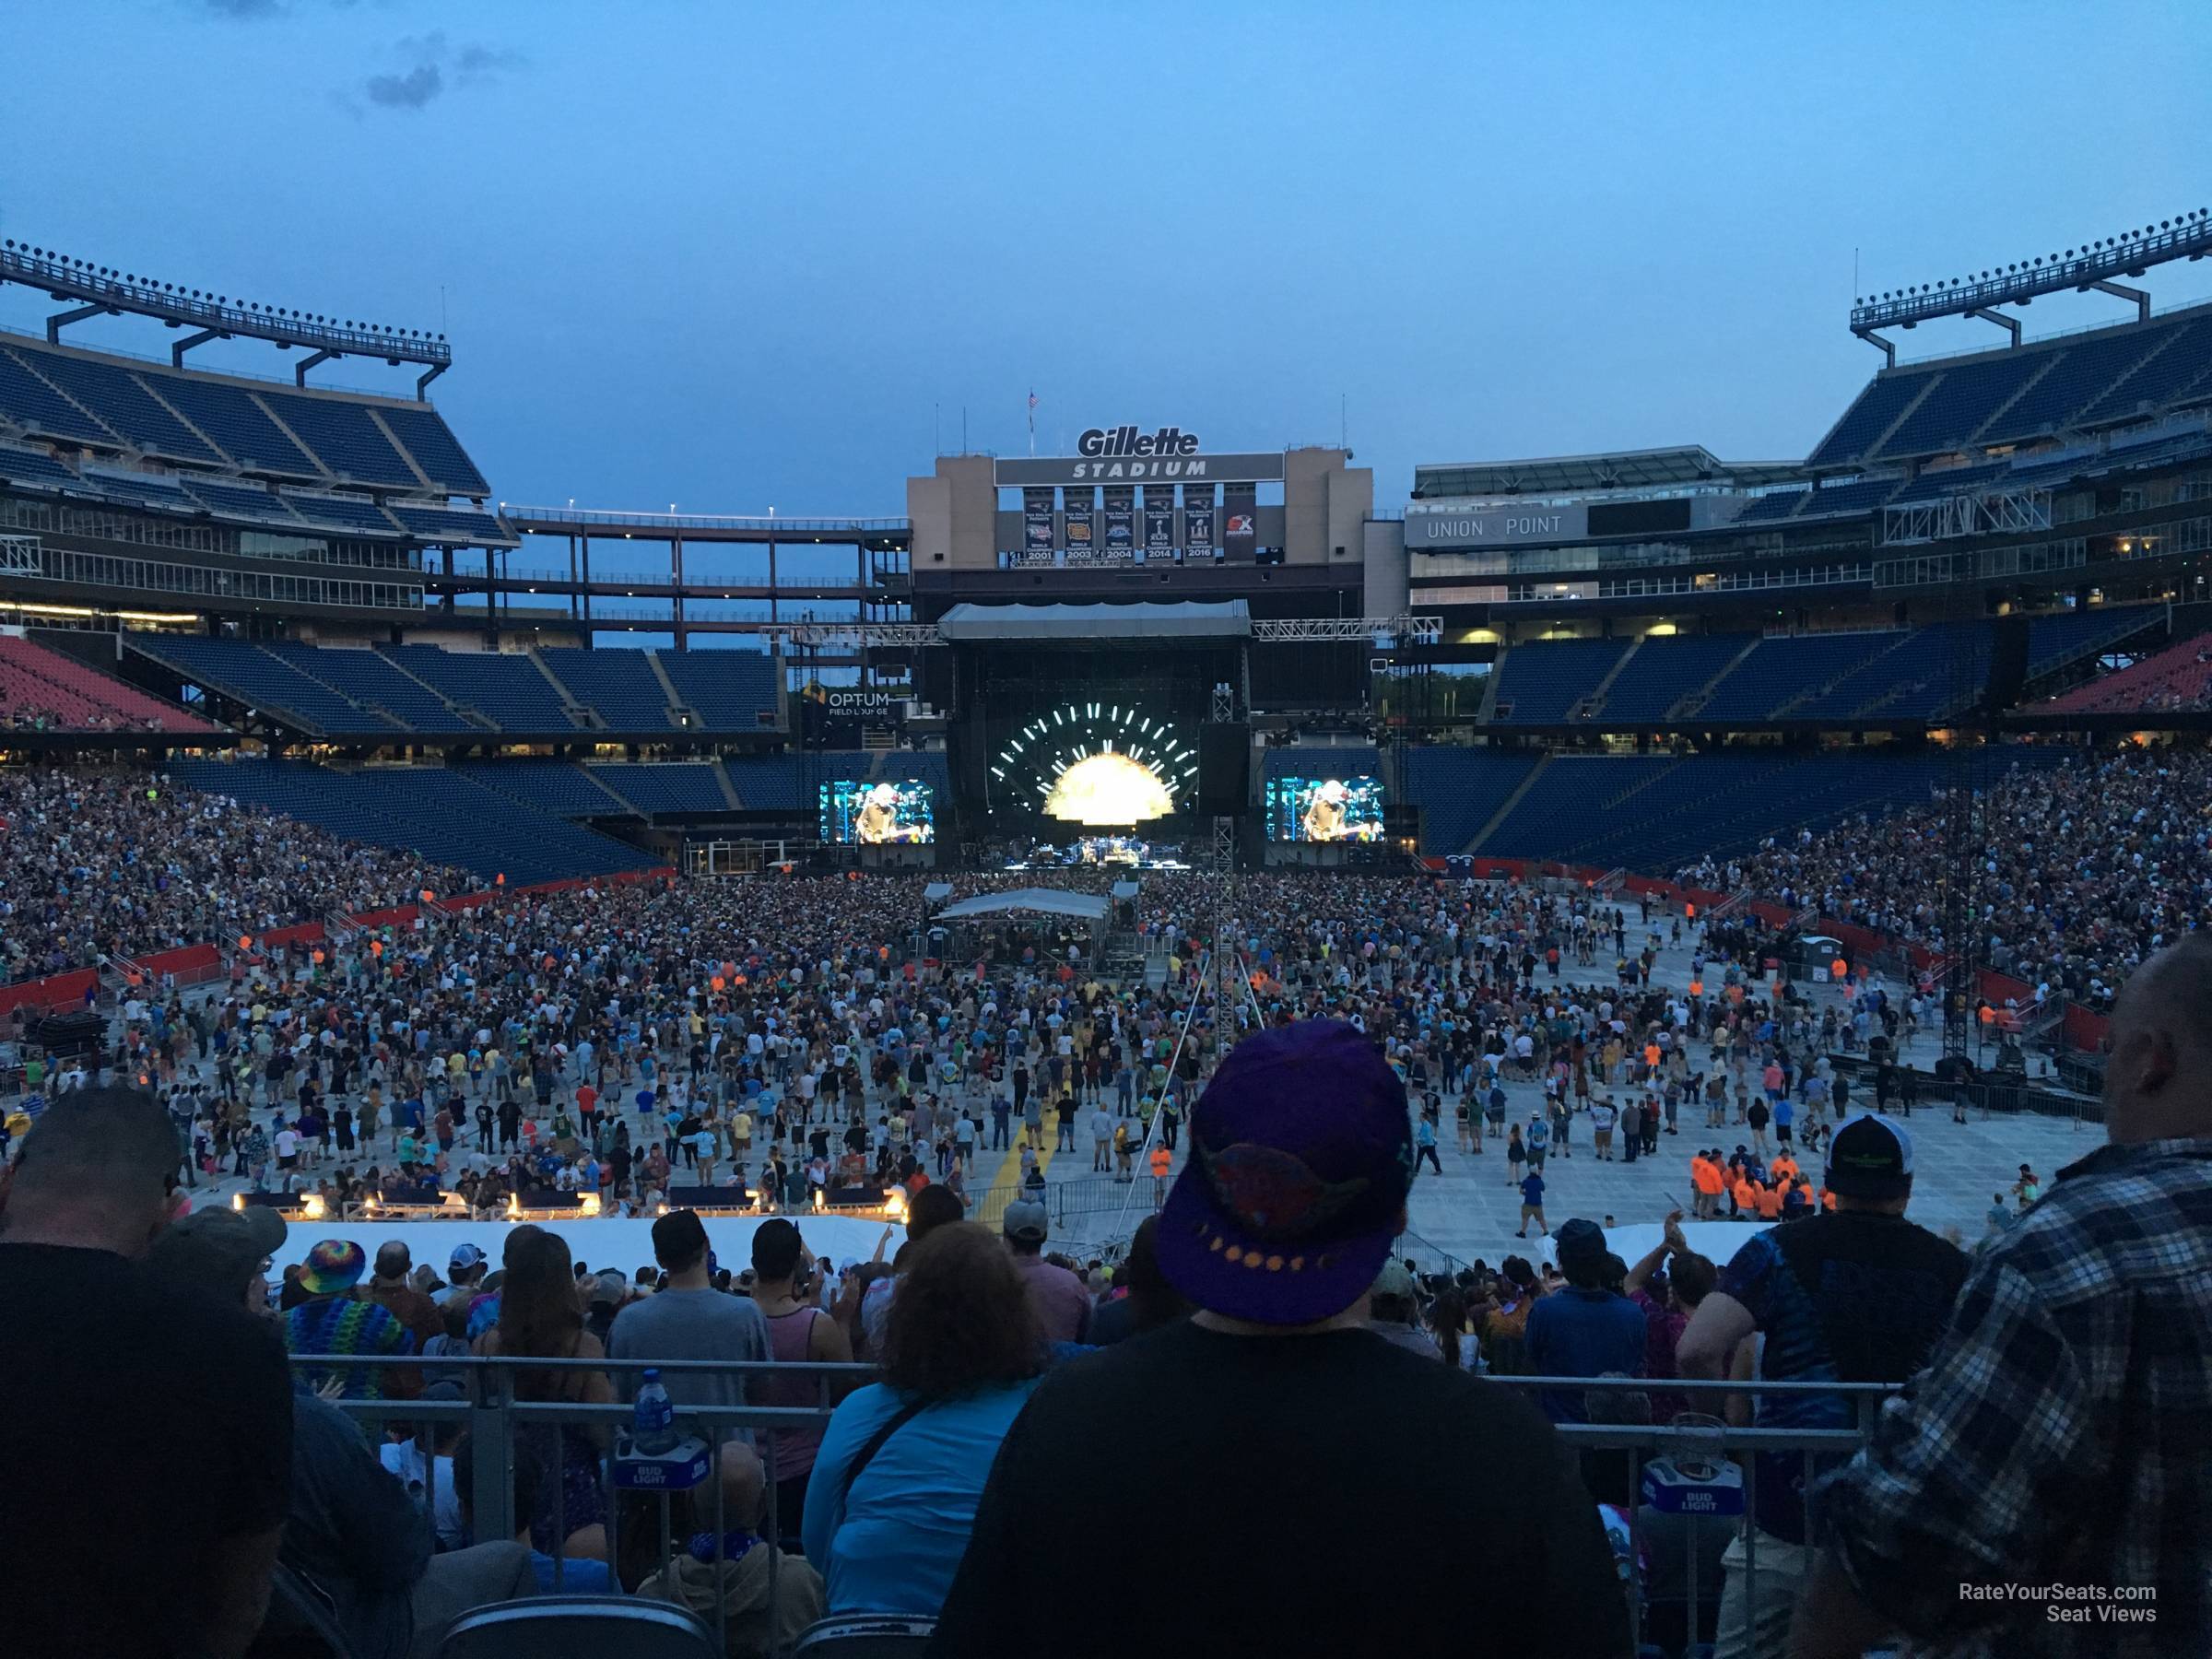 head-on concert view at Gillette Stadium